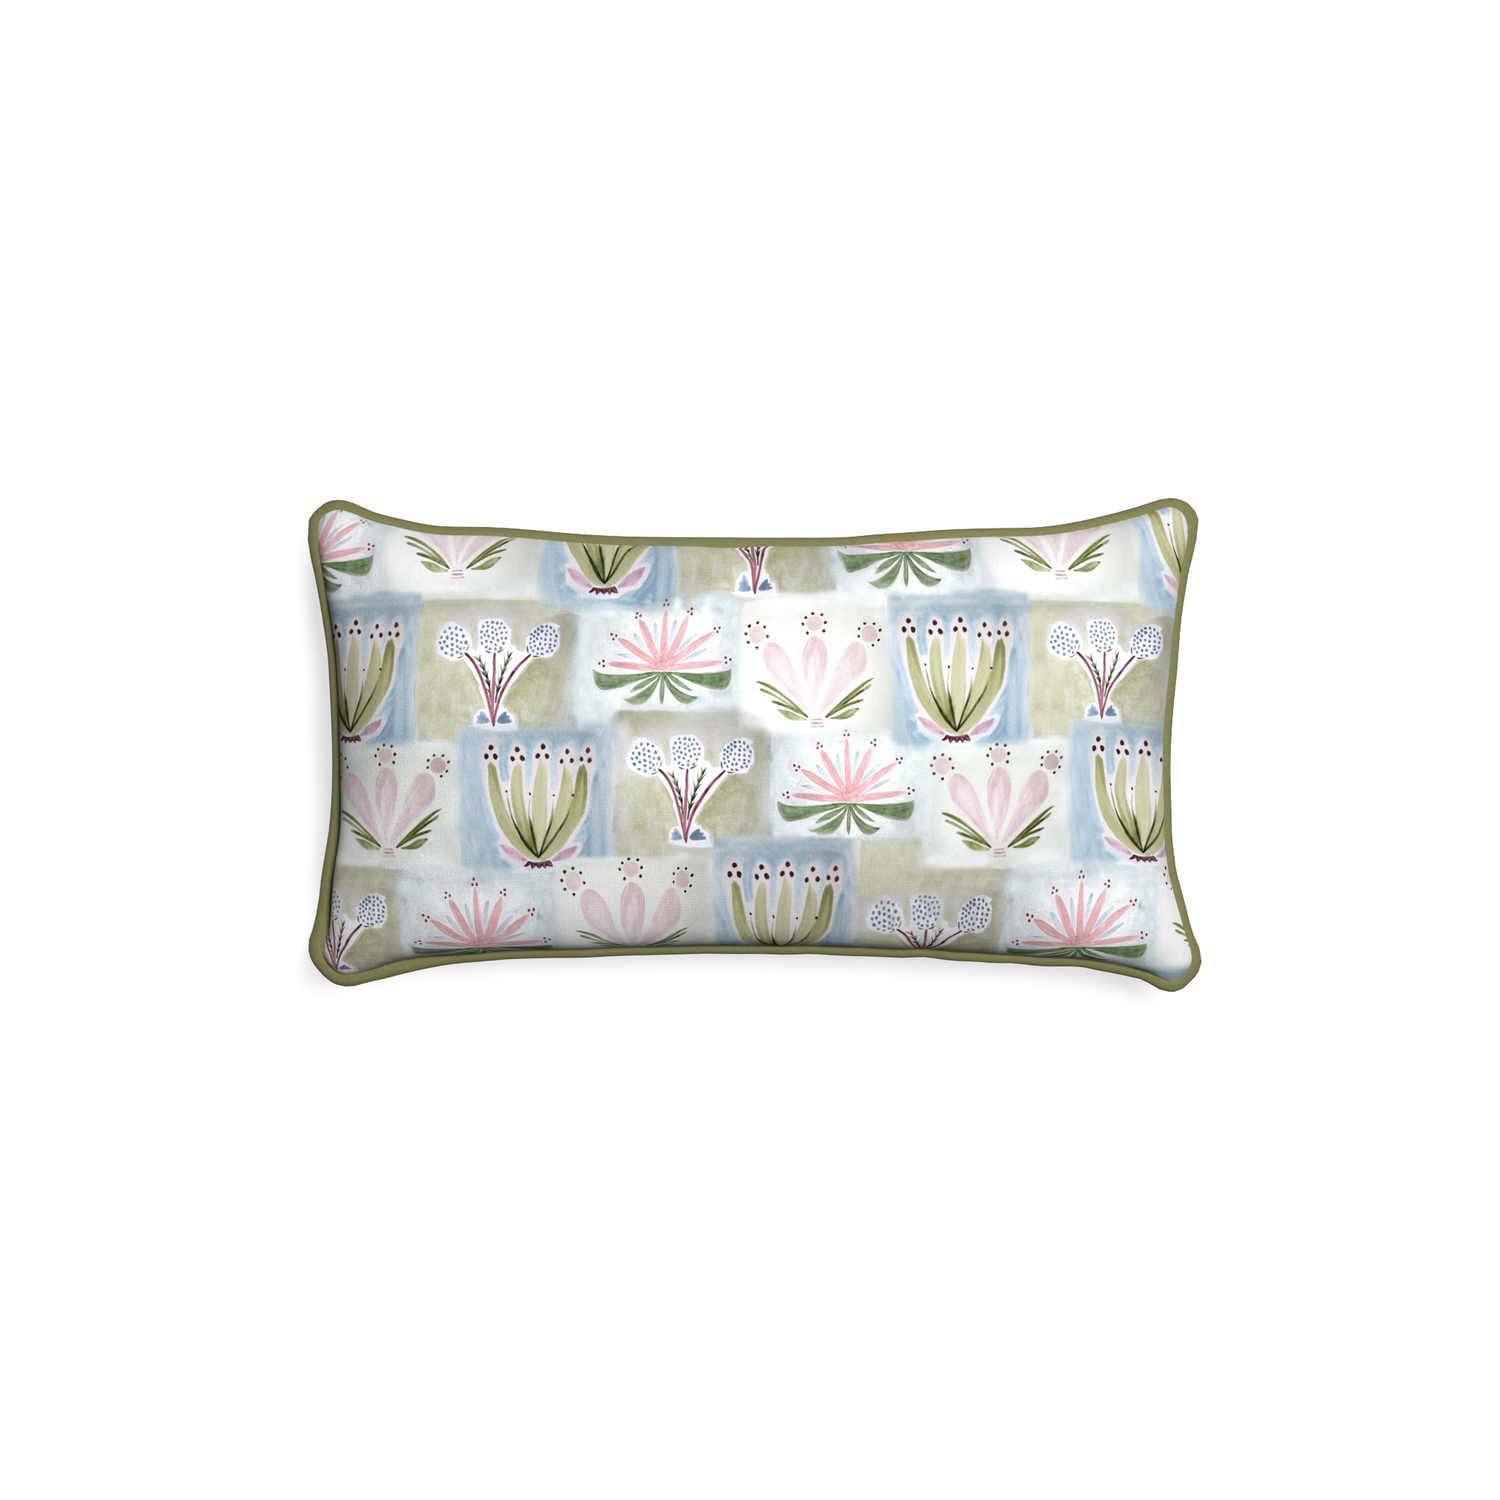 rectangle hand painted floral pillow with moss green piping